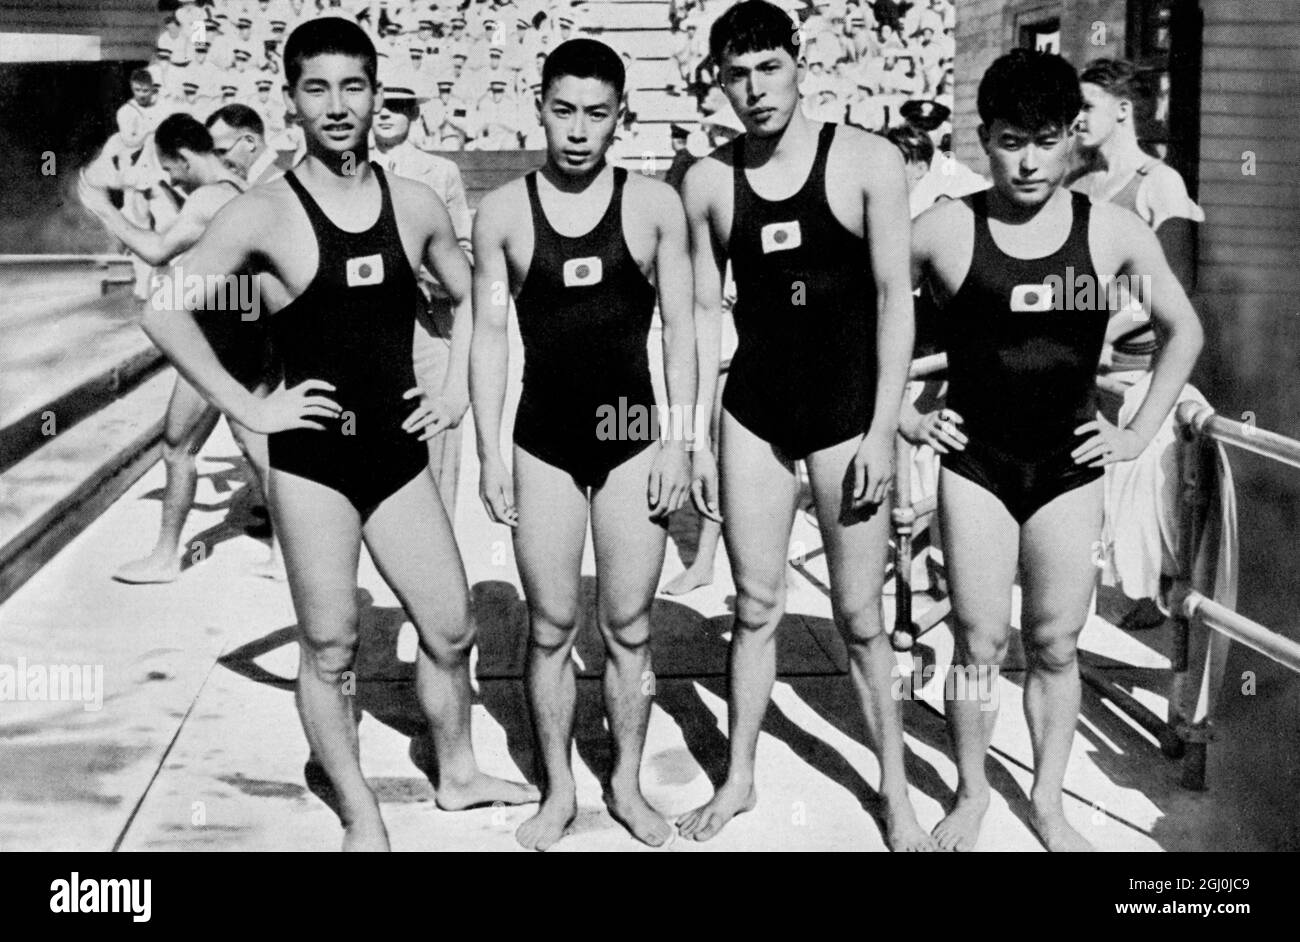 The Erdreil relay 4 x 200m Olympic competition, in Berlin 1936. This picture shows the outstanding Japanese relay crew (l-r) Miyazaki, Yusa, Toyoda, Yokojama. This team is considered generally as unbeatable. ©TopFoto Stock Photo